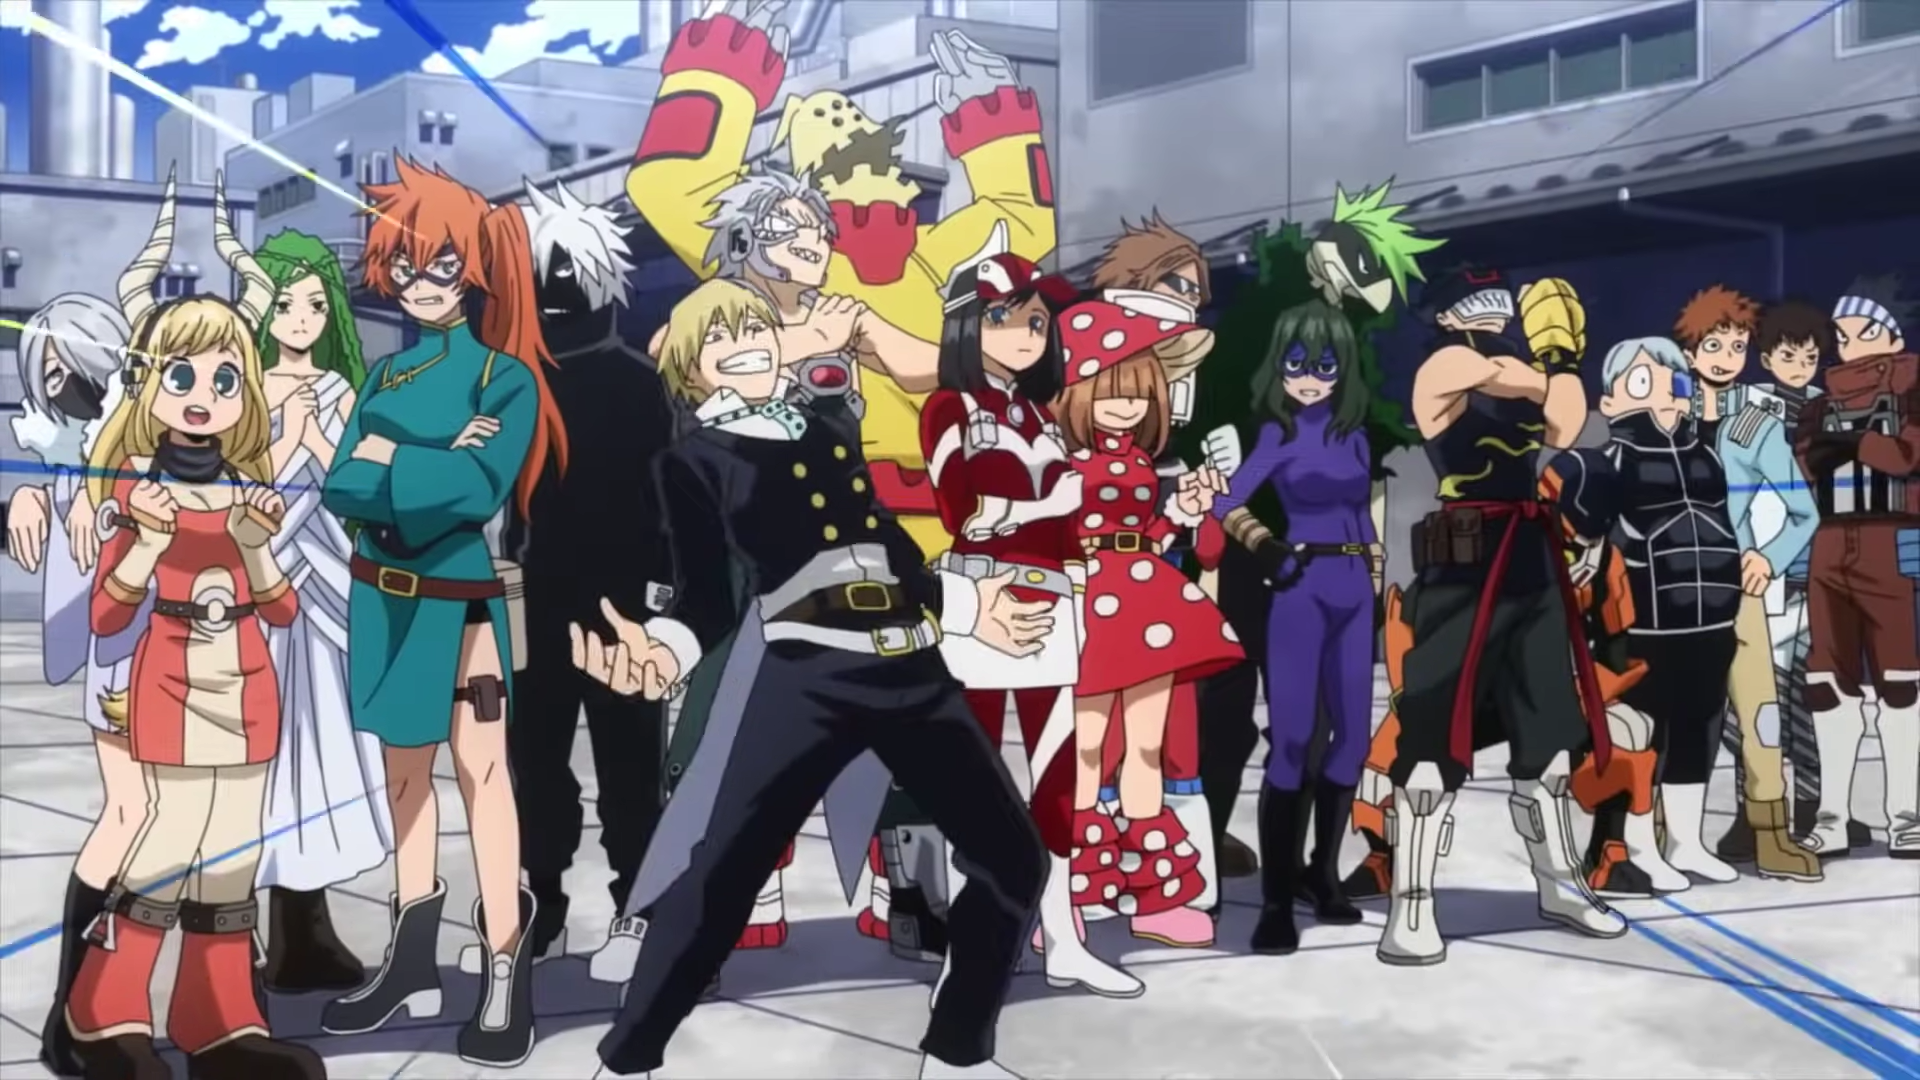 Is My Hero Academia Season 5 Simulcast on Crunchyroll, Netflix, Hulu, or Funimation in English Sub or Dub? Where to Watch and Stream the Latest Episodes Free Online